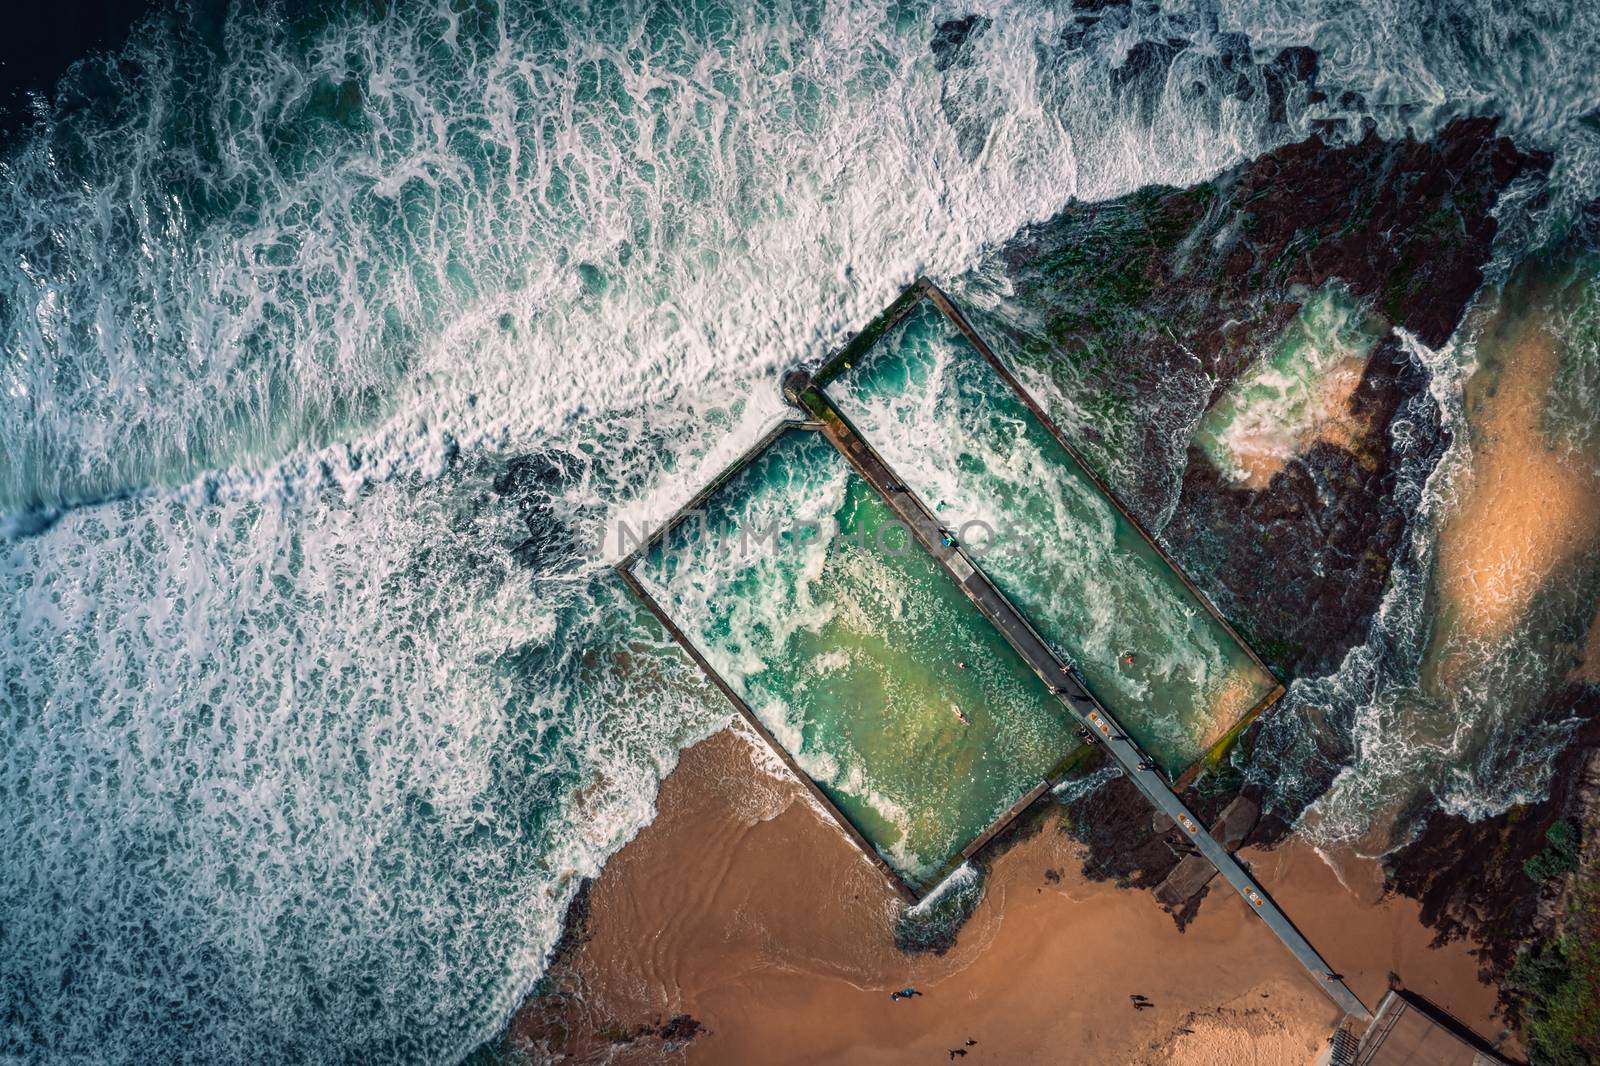 Aerial views of waves from a high tide wash over mossy rocks and the  twin ocean tidal pools at the beach.   Motion in the faster moving flows.   
Location, Austinmer, Australia